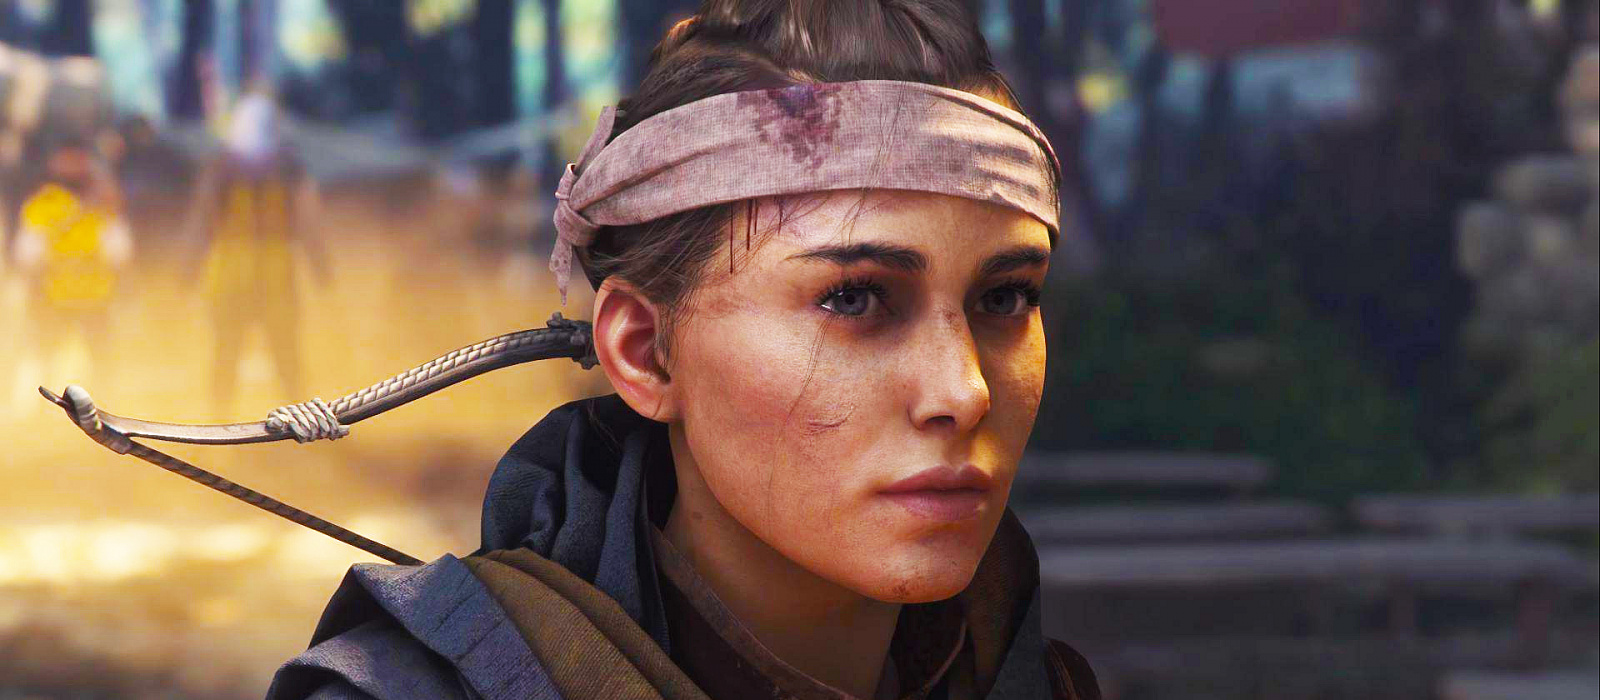 A Plague Tale: Requiem Game Guide - how to find all memories and solve puzzles